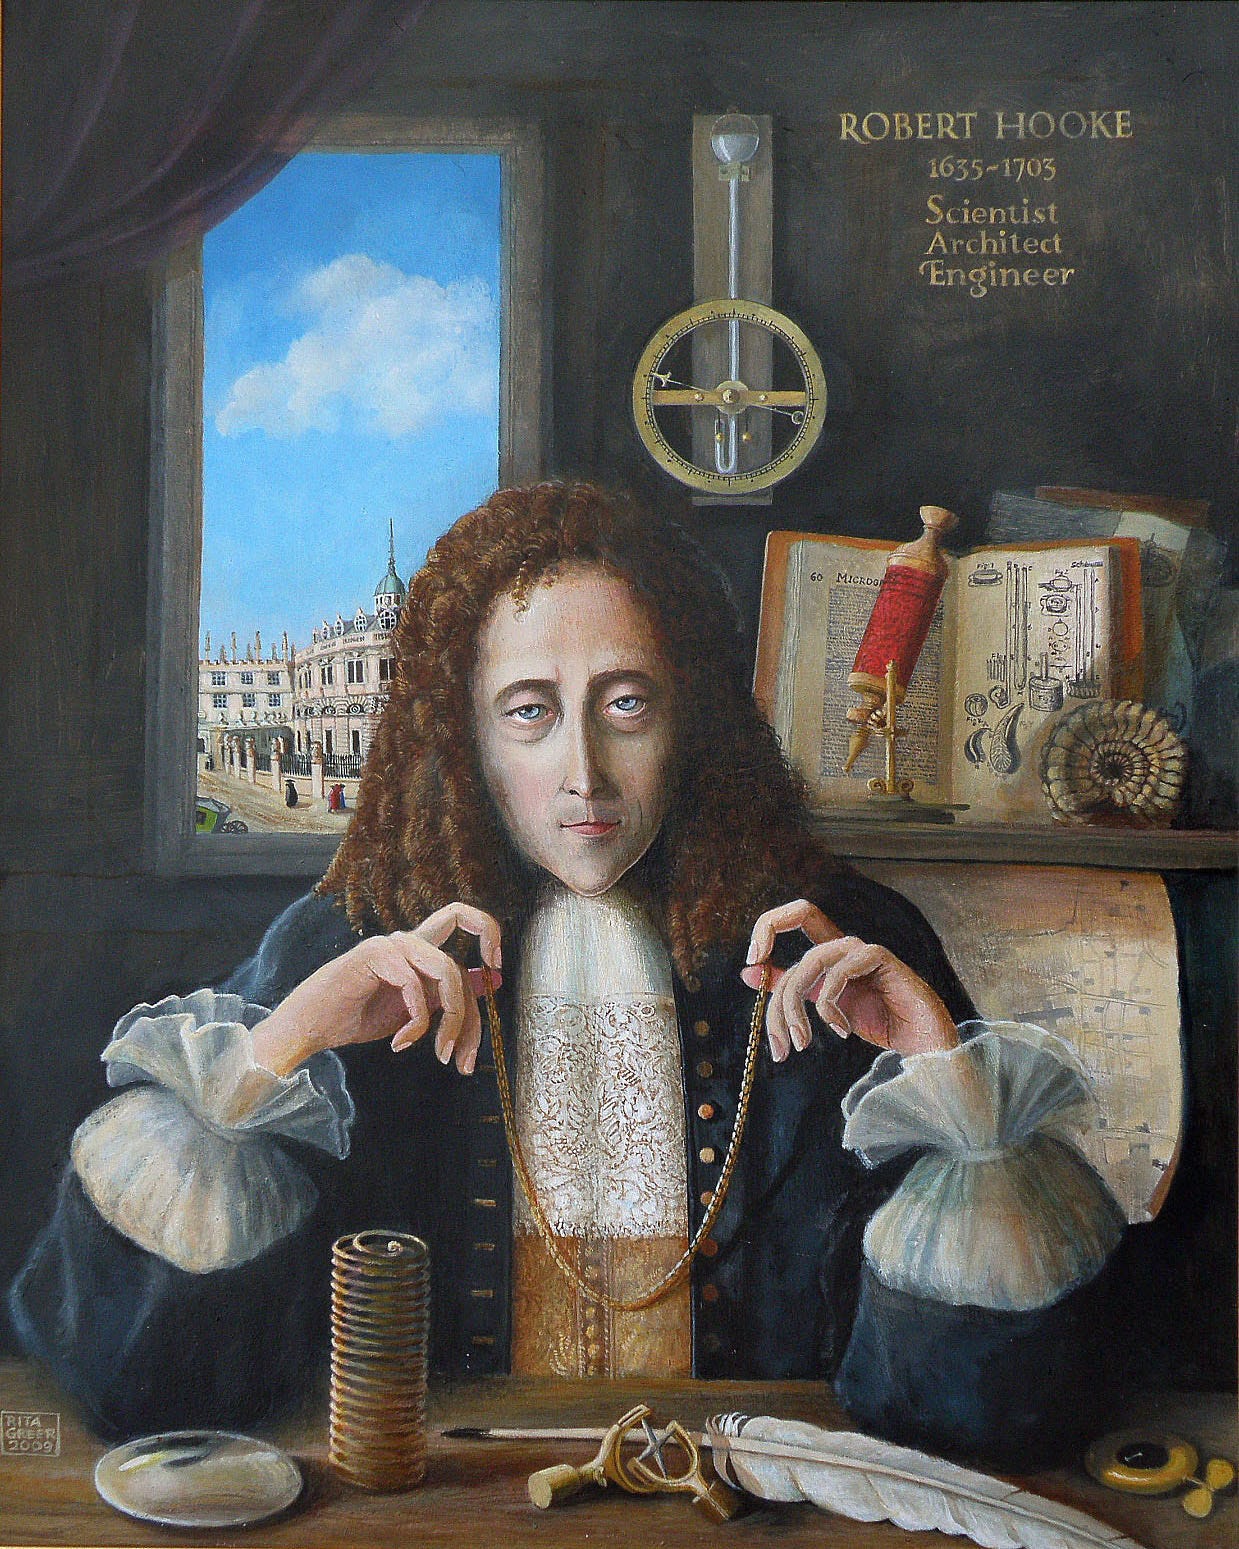 Painting of Robert Hooke seated in a study, holding a small chain suspended between his hands by the ends